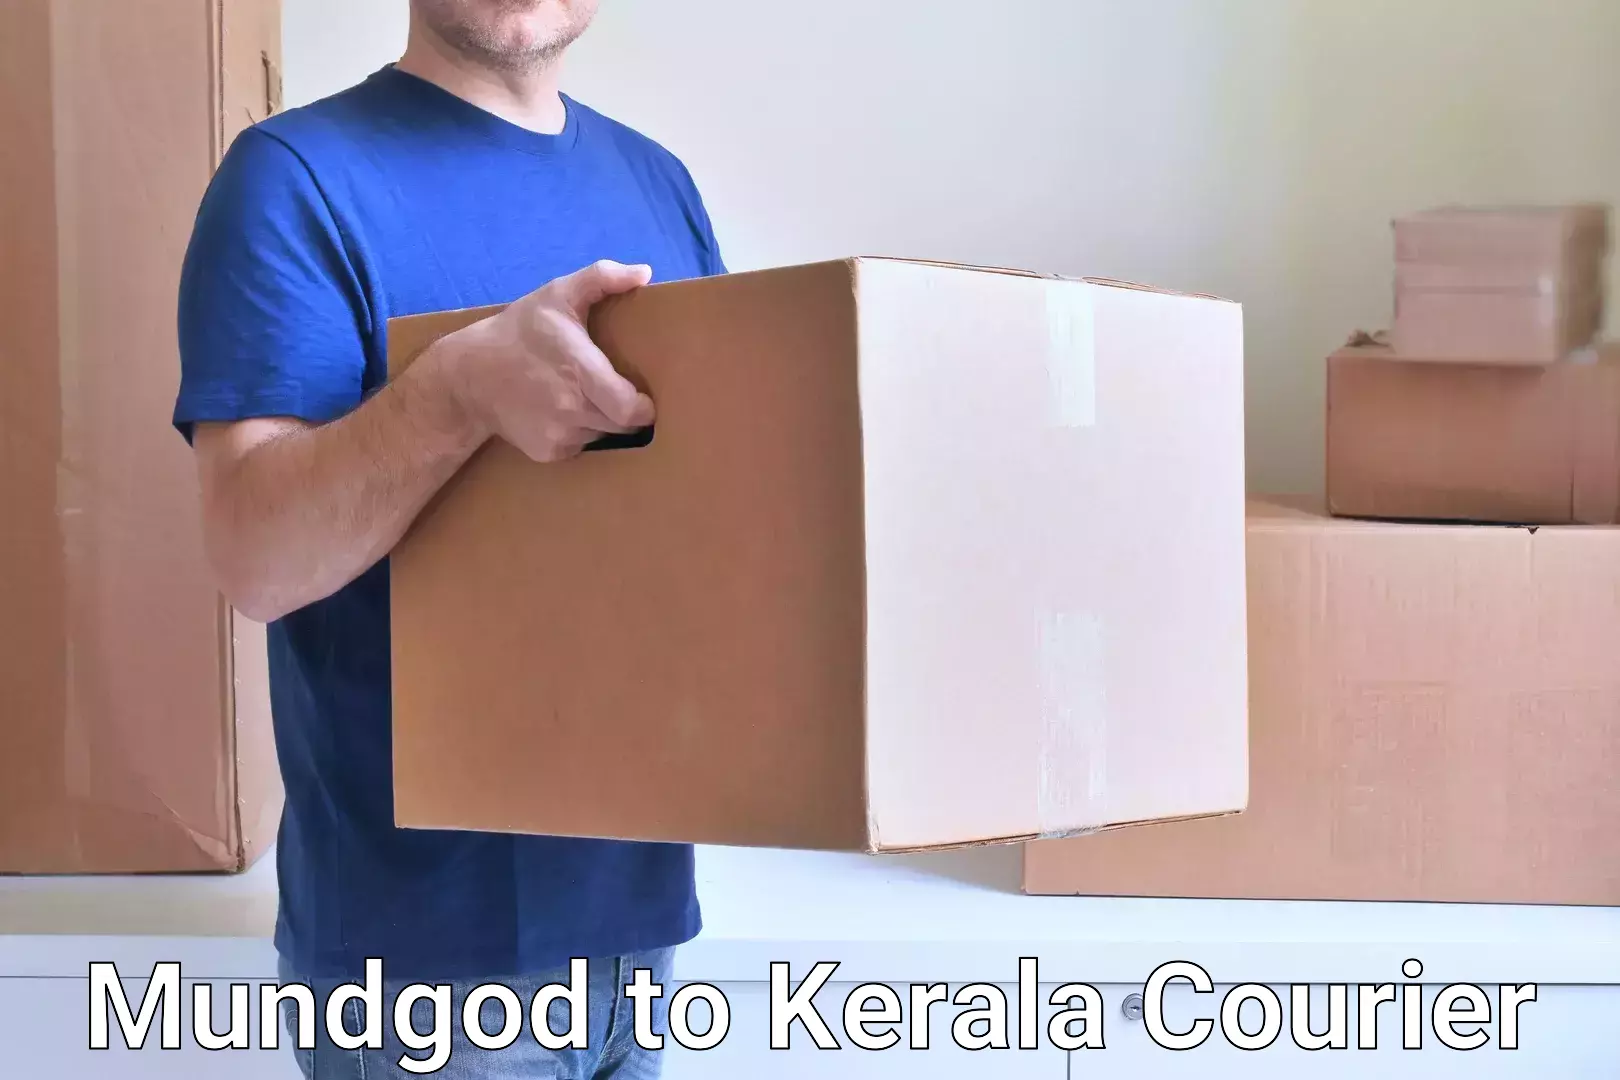 State-of-the-art courier technology Mundgod to Kerala